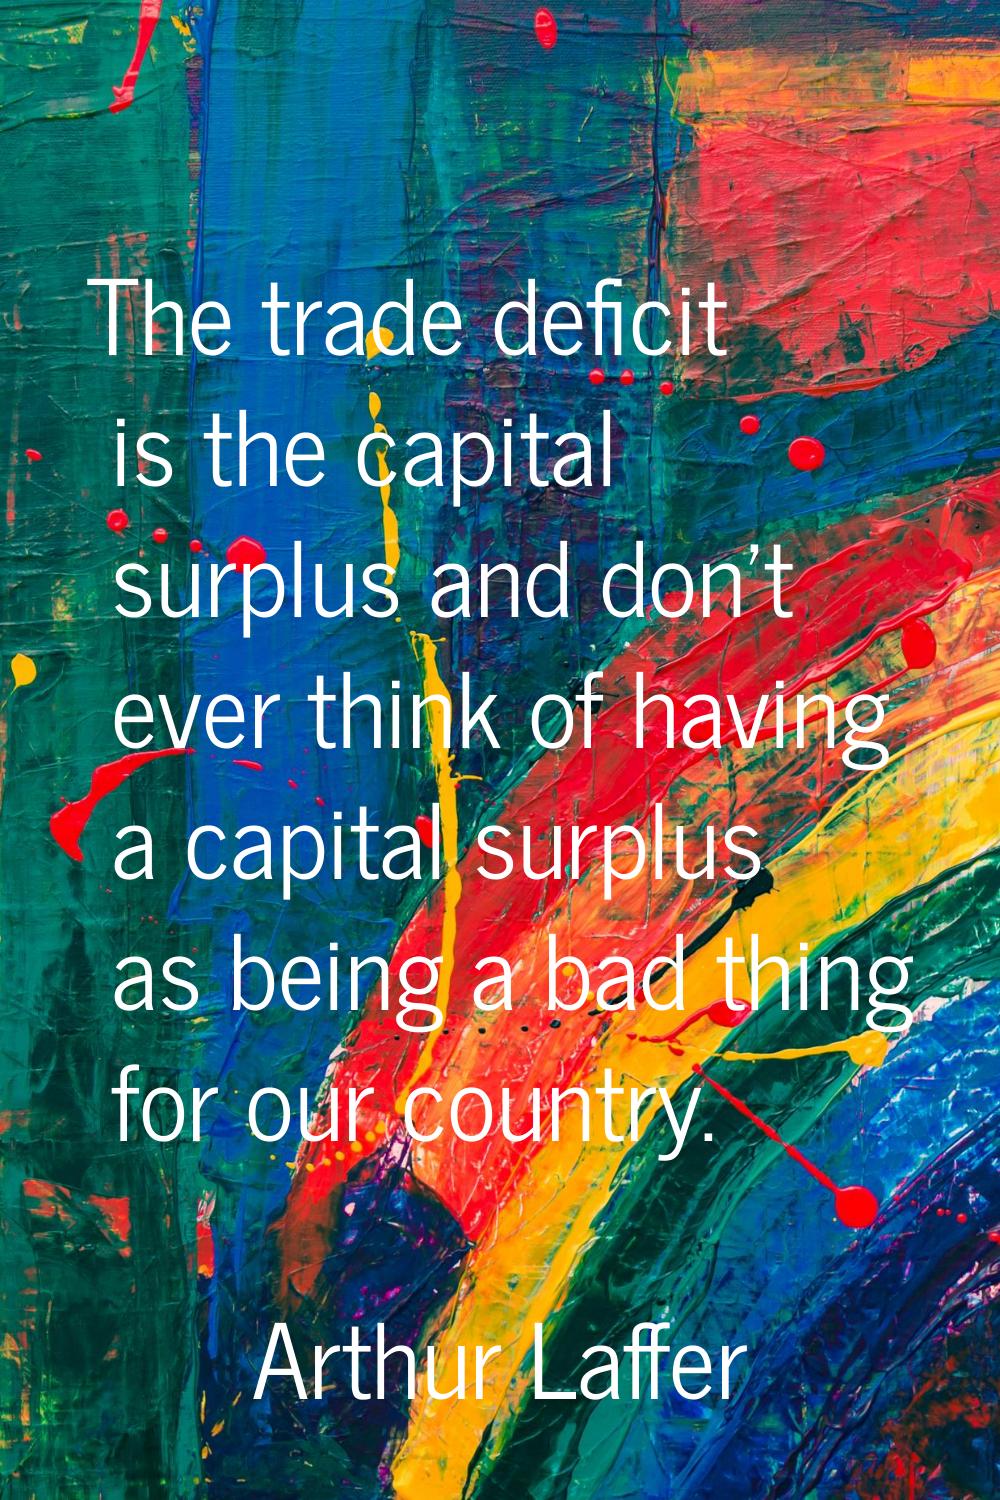 The trade deficit is the capital surplus and don't ever think of having a capital surplus as being 